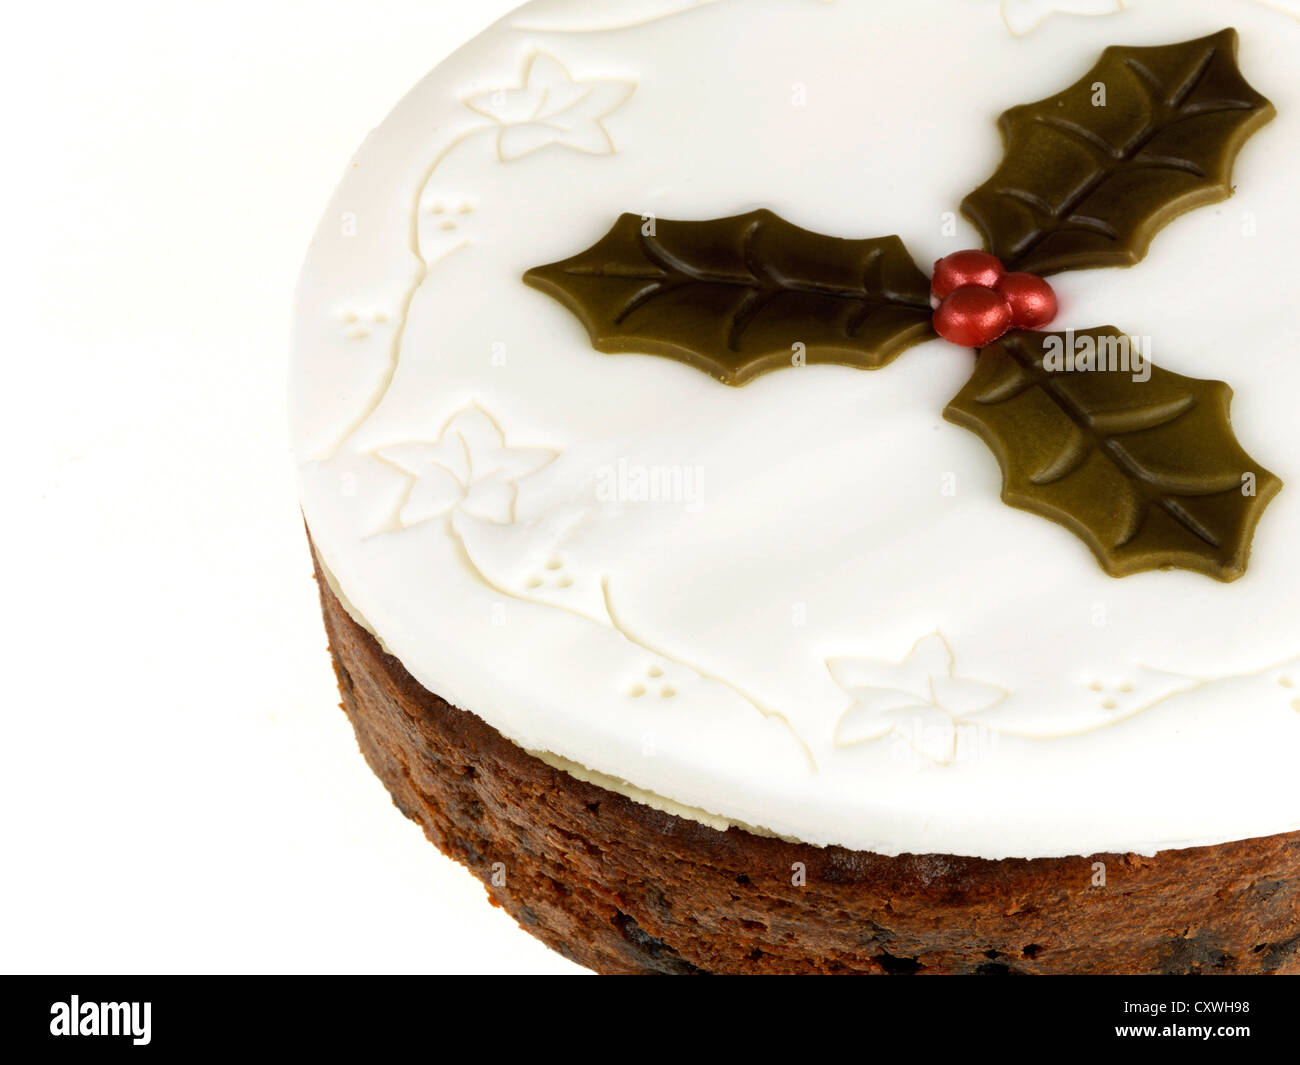 Rich Traditional Festive Christmas Fruit Cake With White Icing, Decorated With Holly Leaves, No People Isolated Against A White Background Stock Photo